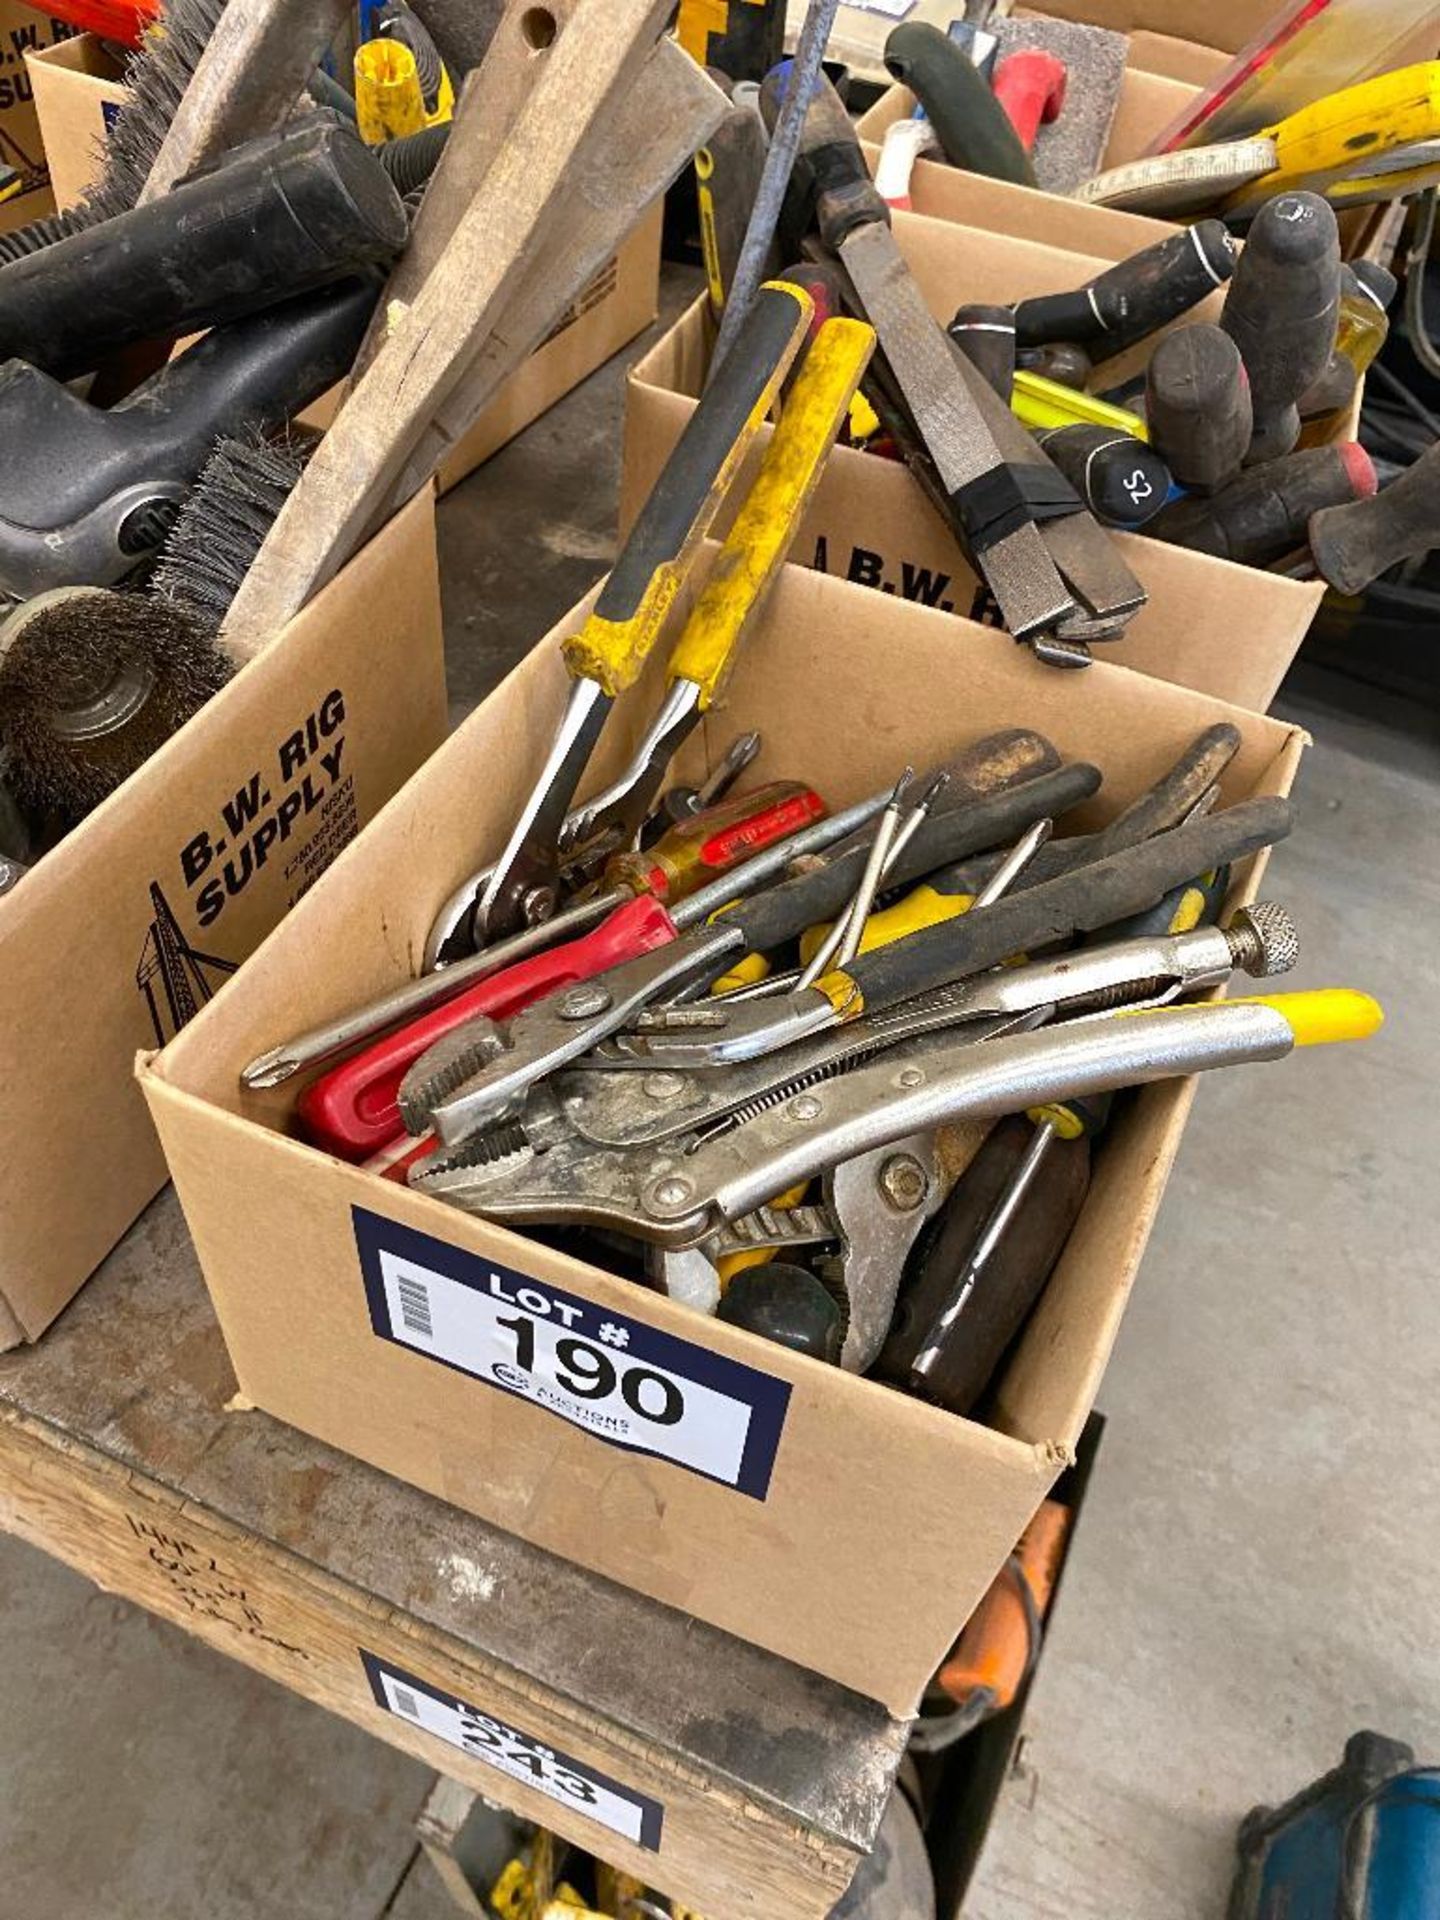 Lot of Asst. Hand Tools including Vice Grips, Screwdrivers, etc.